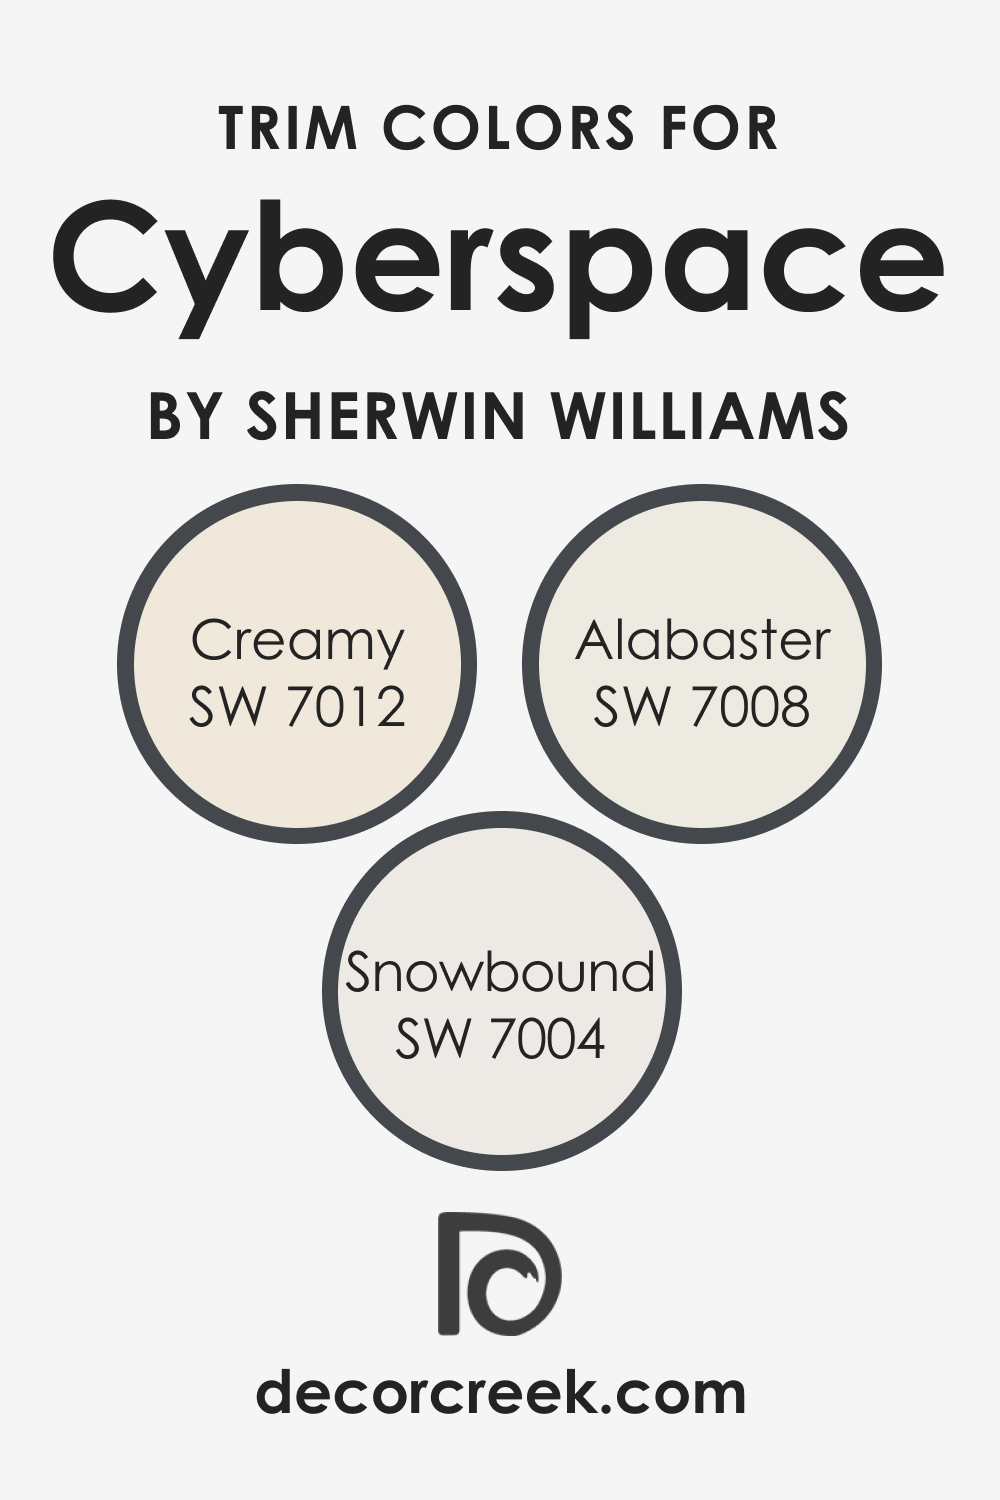 Trim Colors of SW 7076 Cyberspace